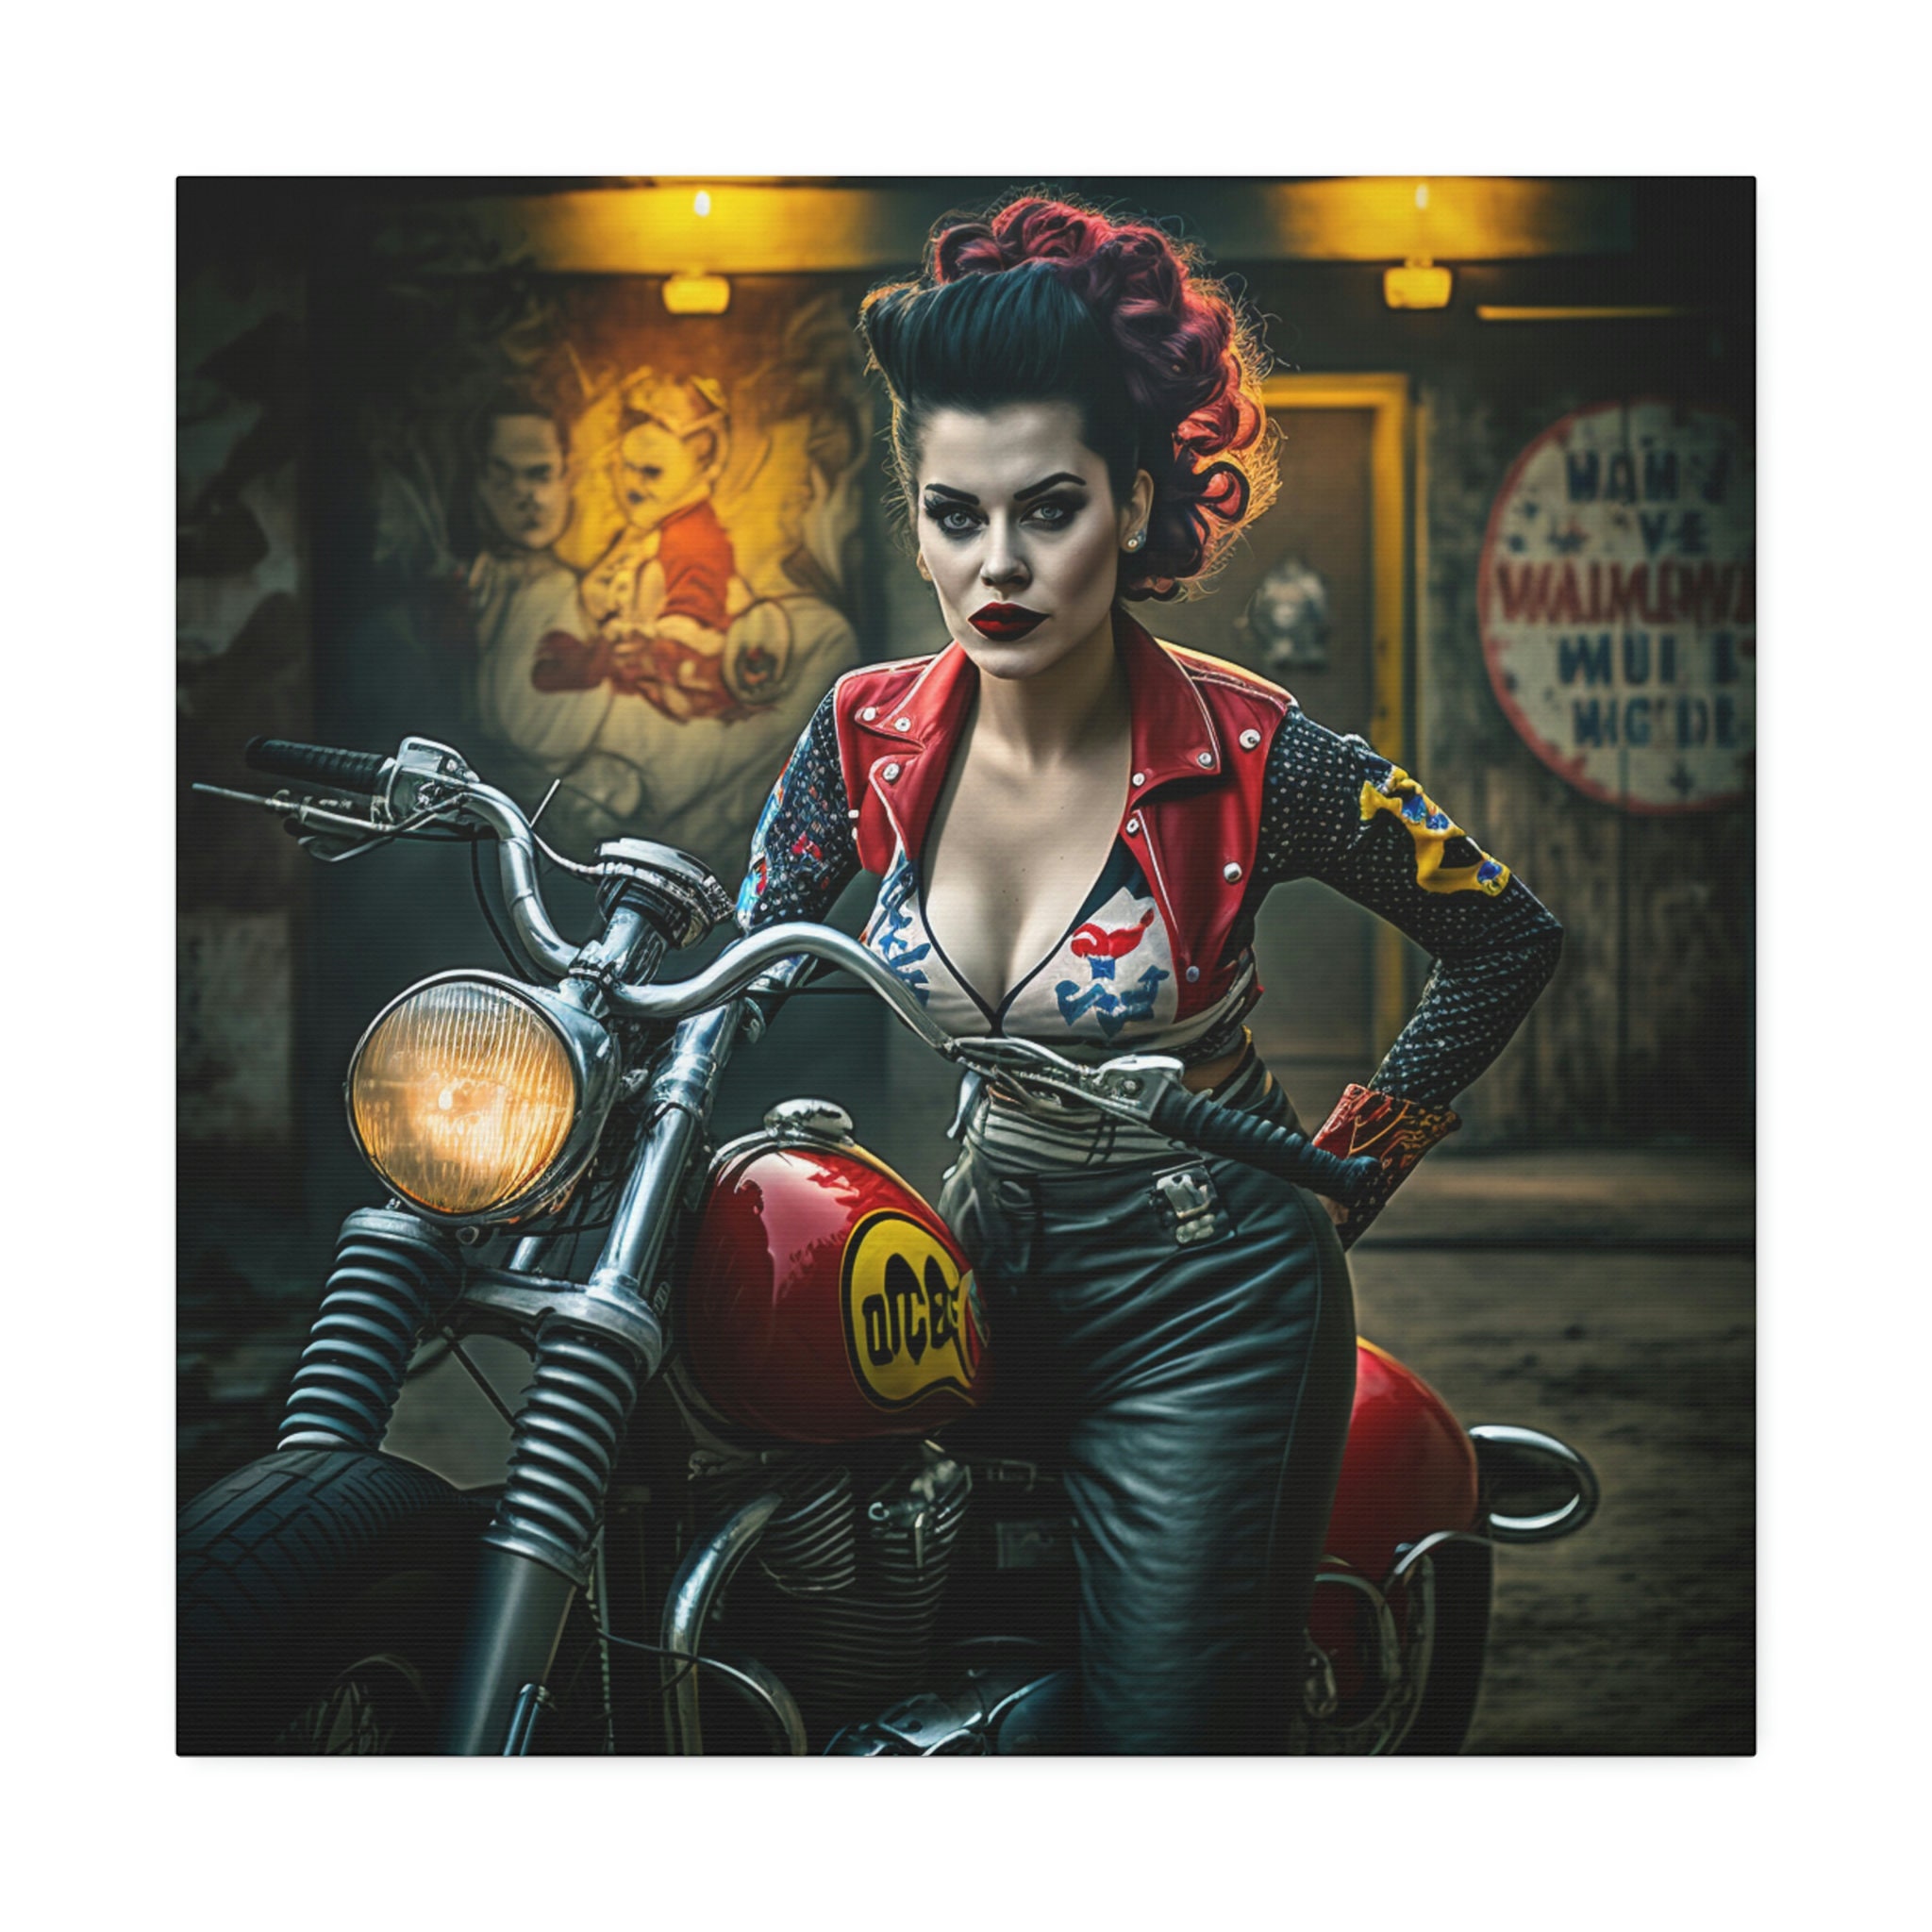 Rockabilly Greaser Girl on Motorcycle Canvas Art